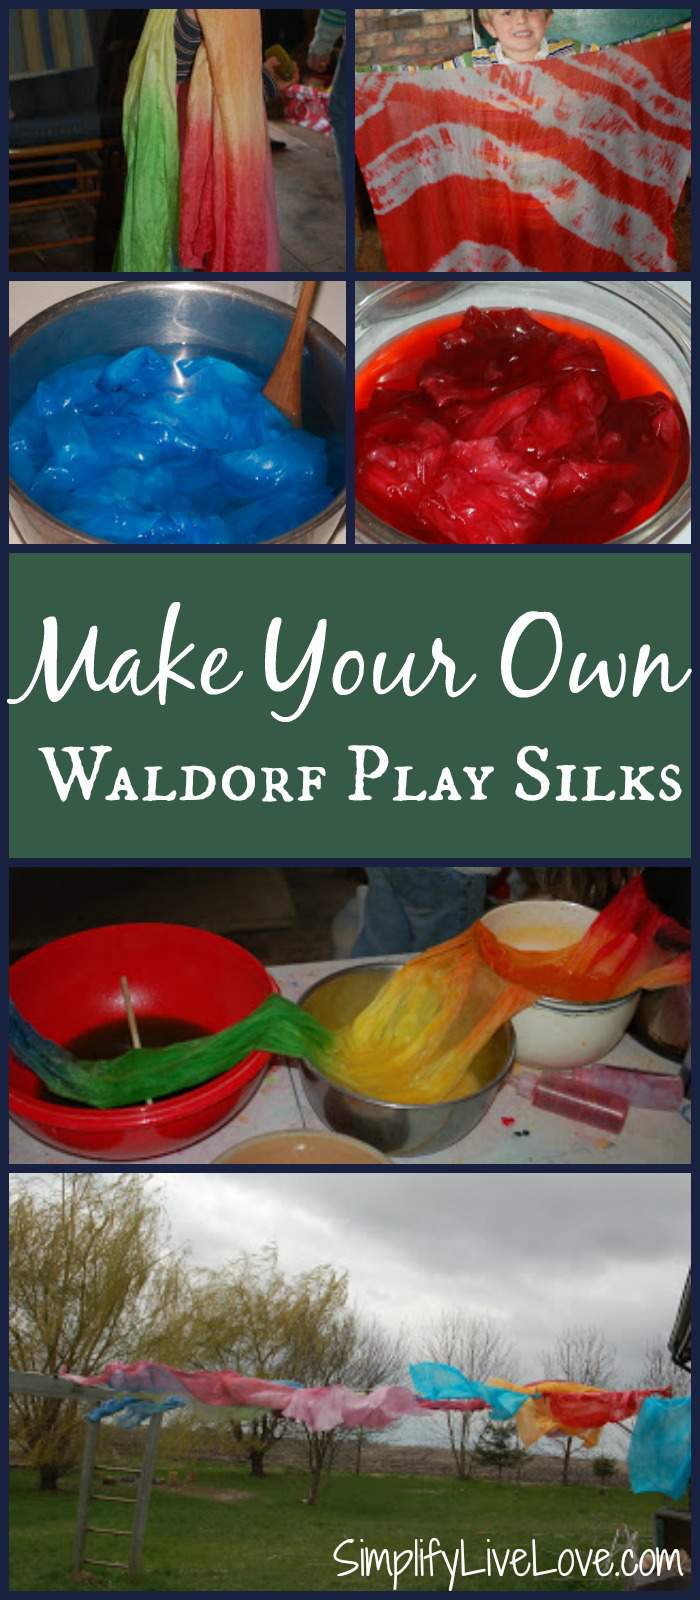 Want to learn how to dye DIY Waldorf play silks?? Follow this easy tutorial to make beautiful rainbow Waldorf play silks and save tons of money!